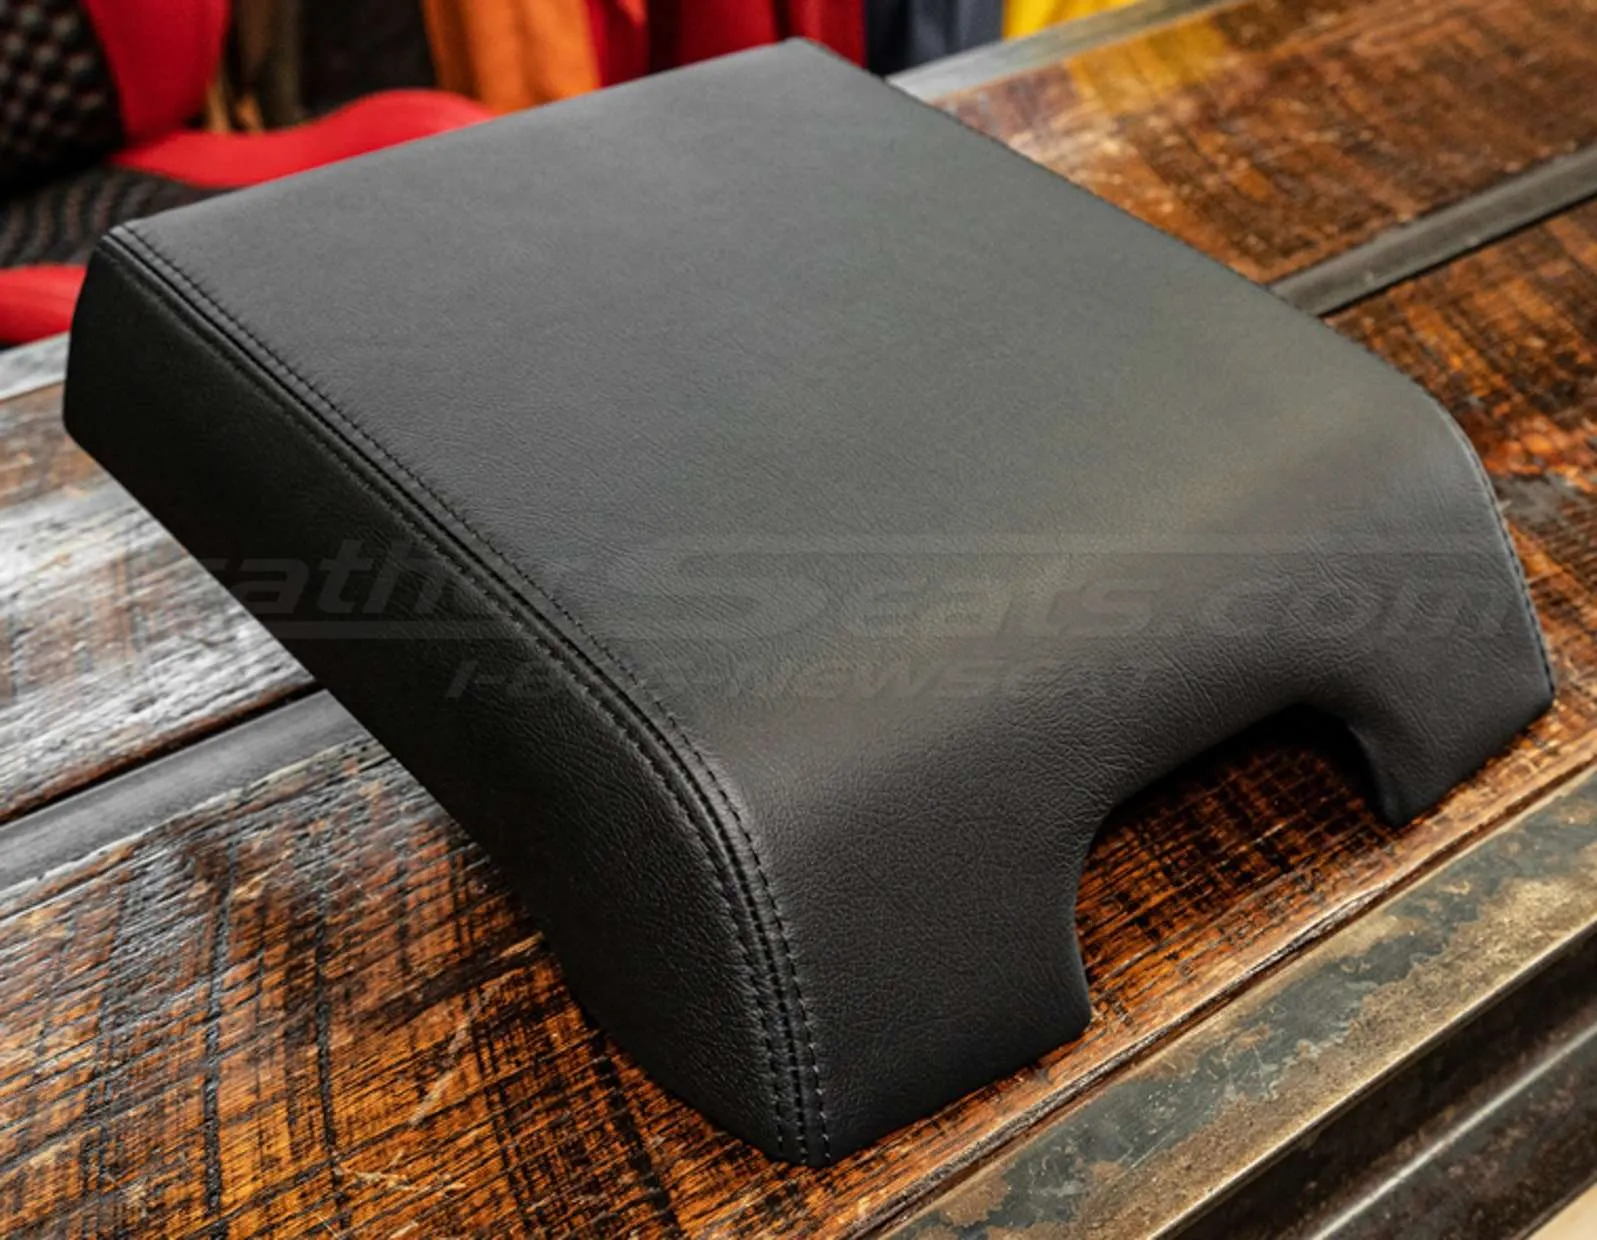 201 Ford Superduty LEather Console Lid cover in Black